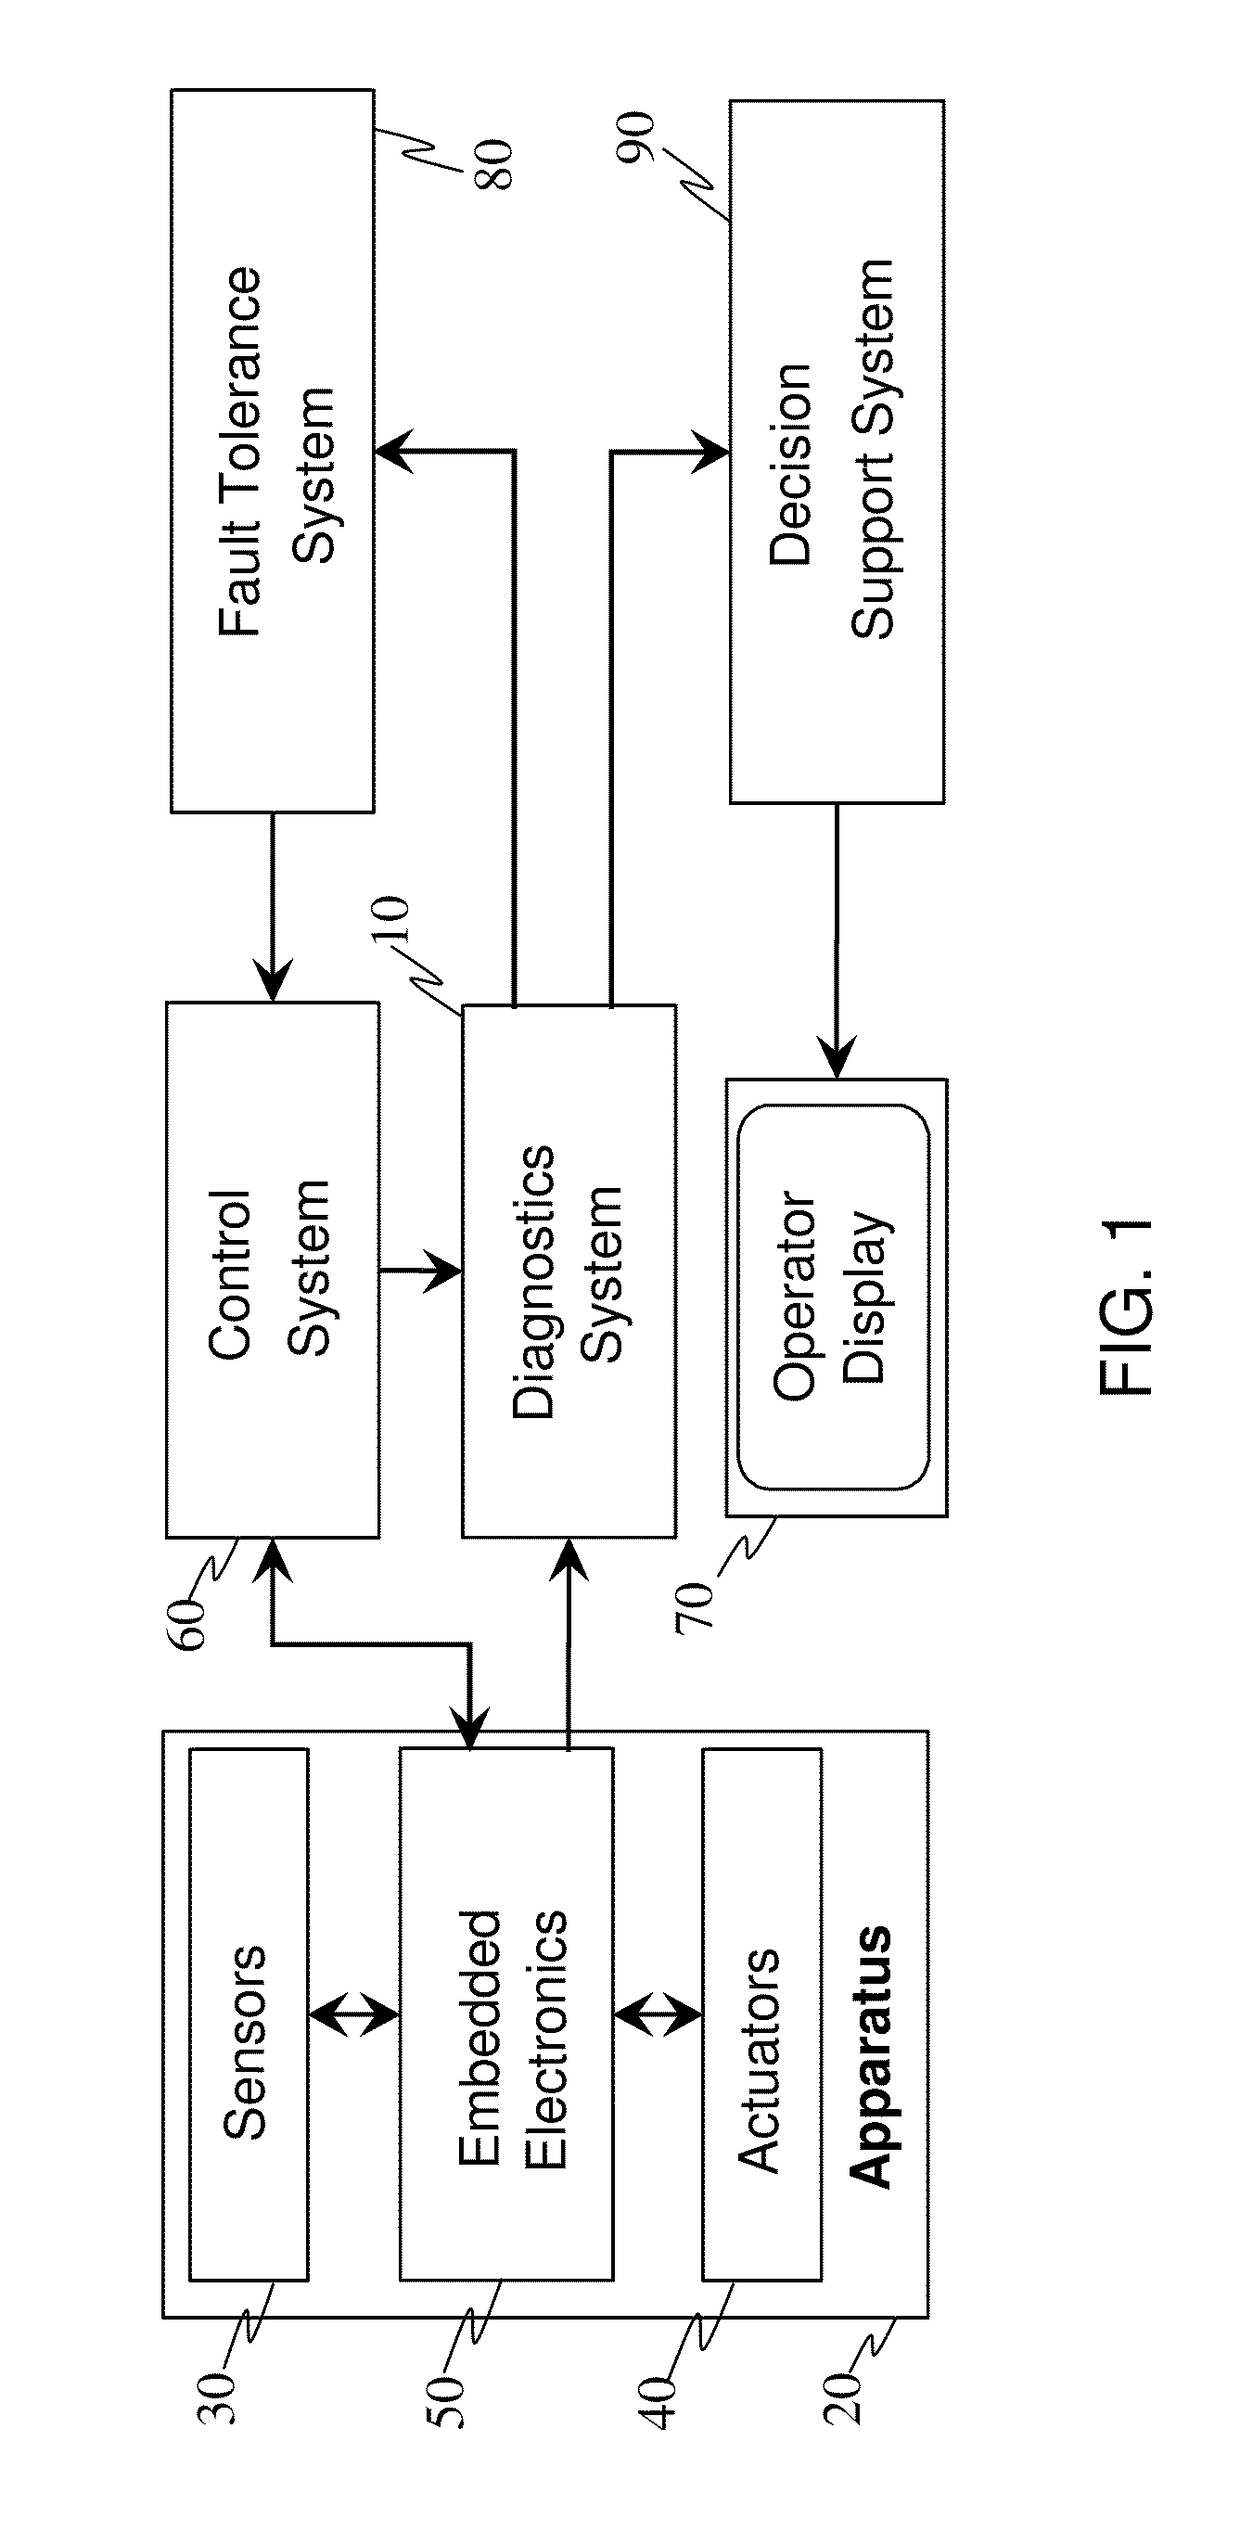 Method and system for diagnostics of apparatus